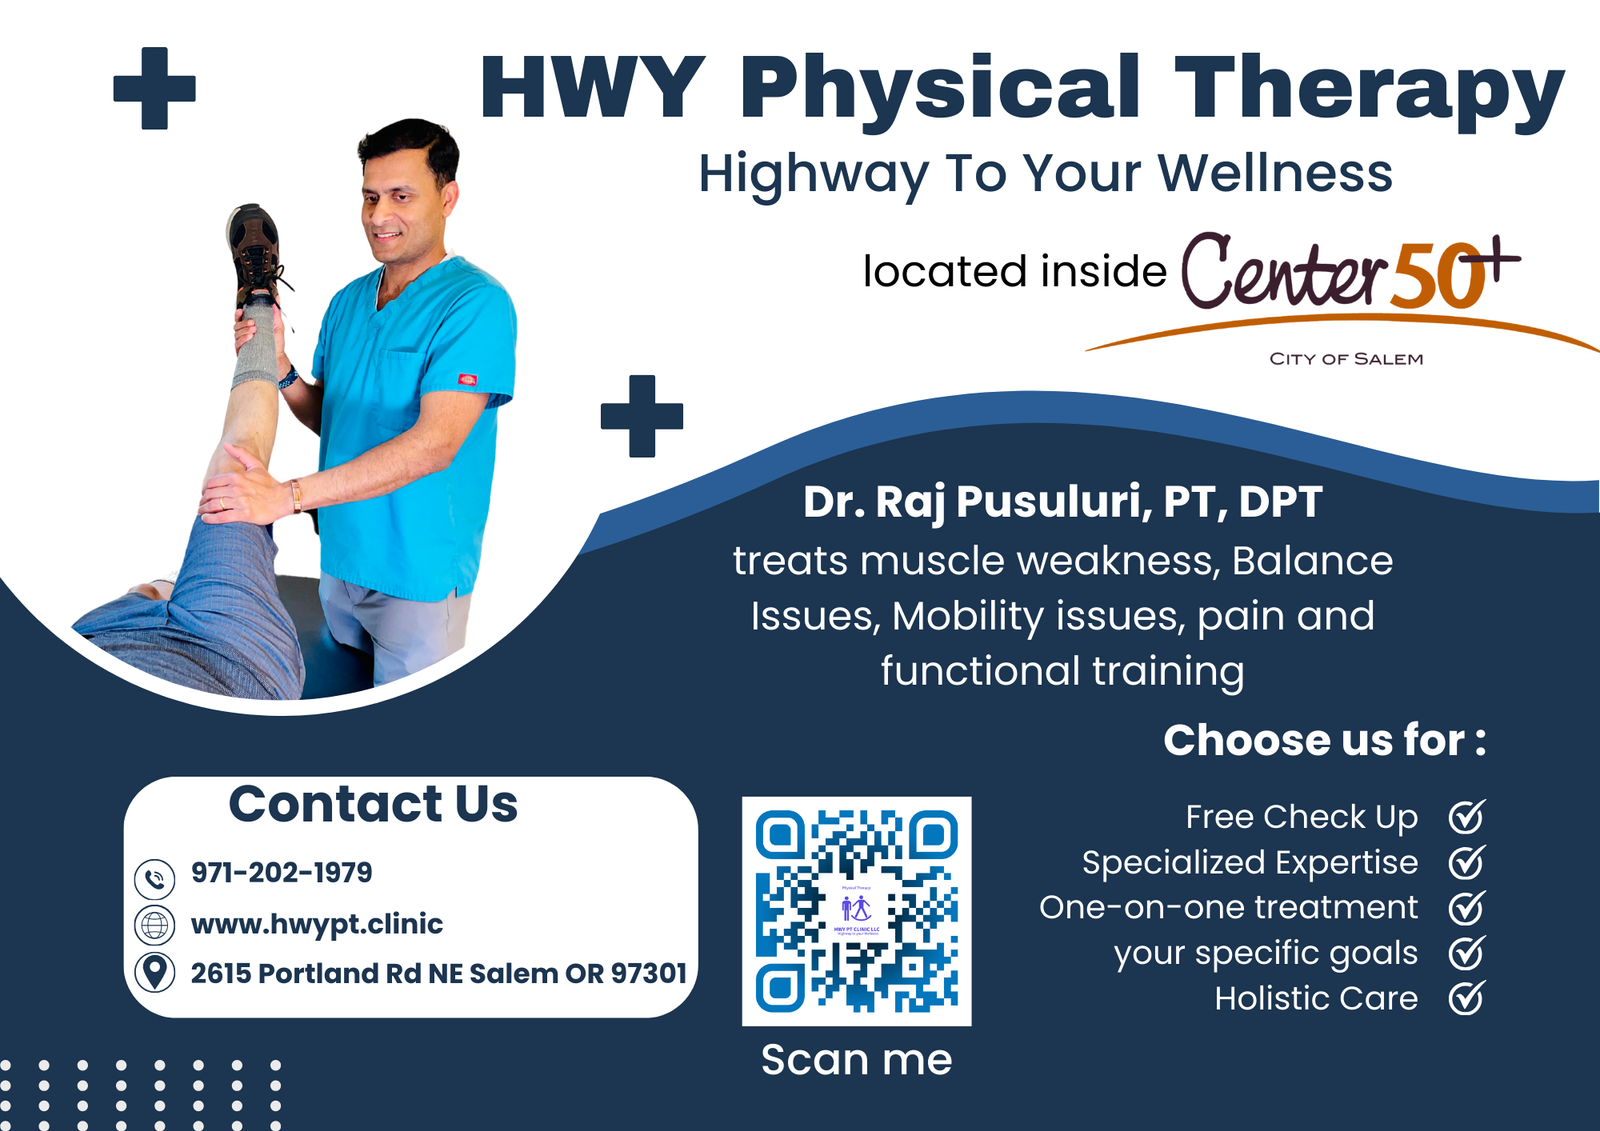 hwy physical therapy at center 50 plus salem oregon